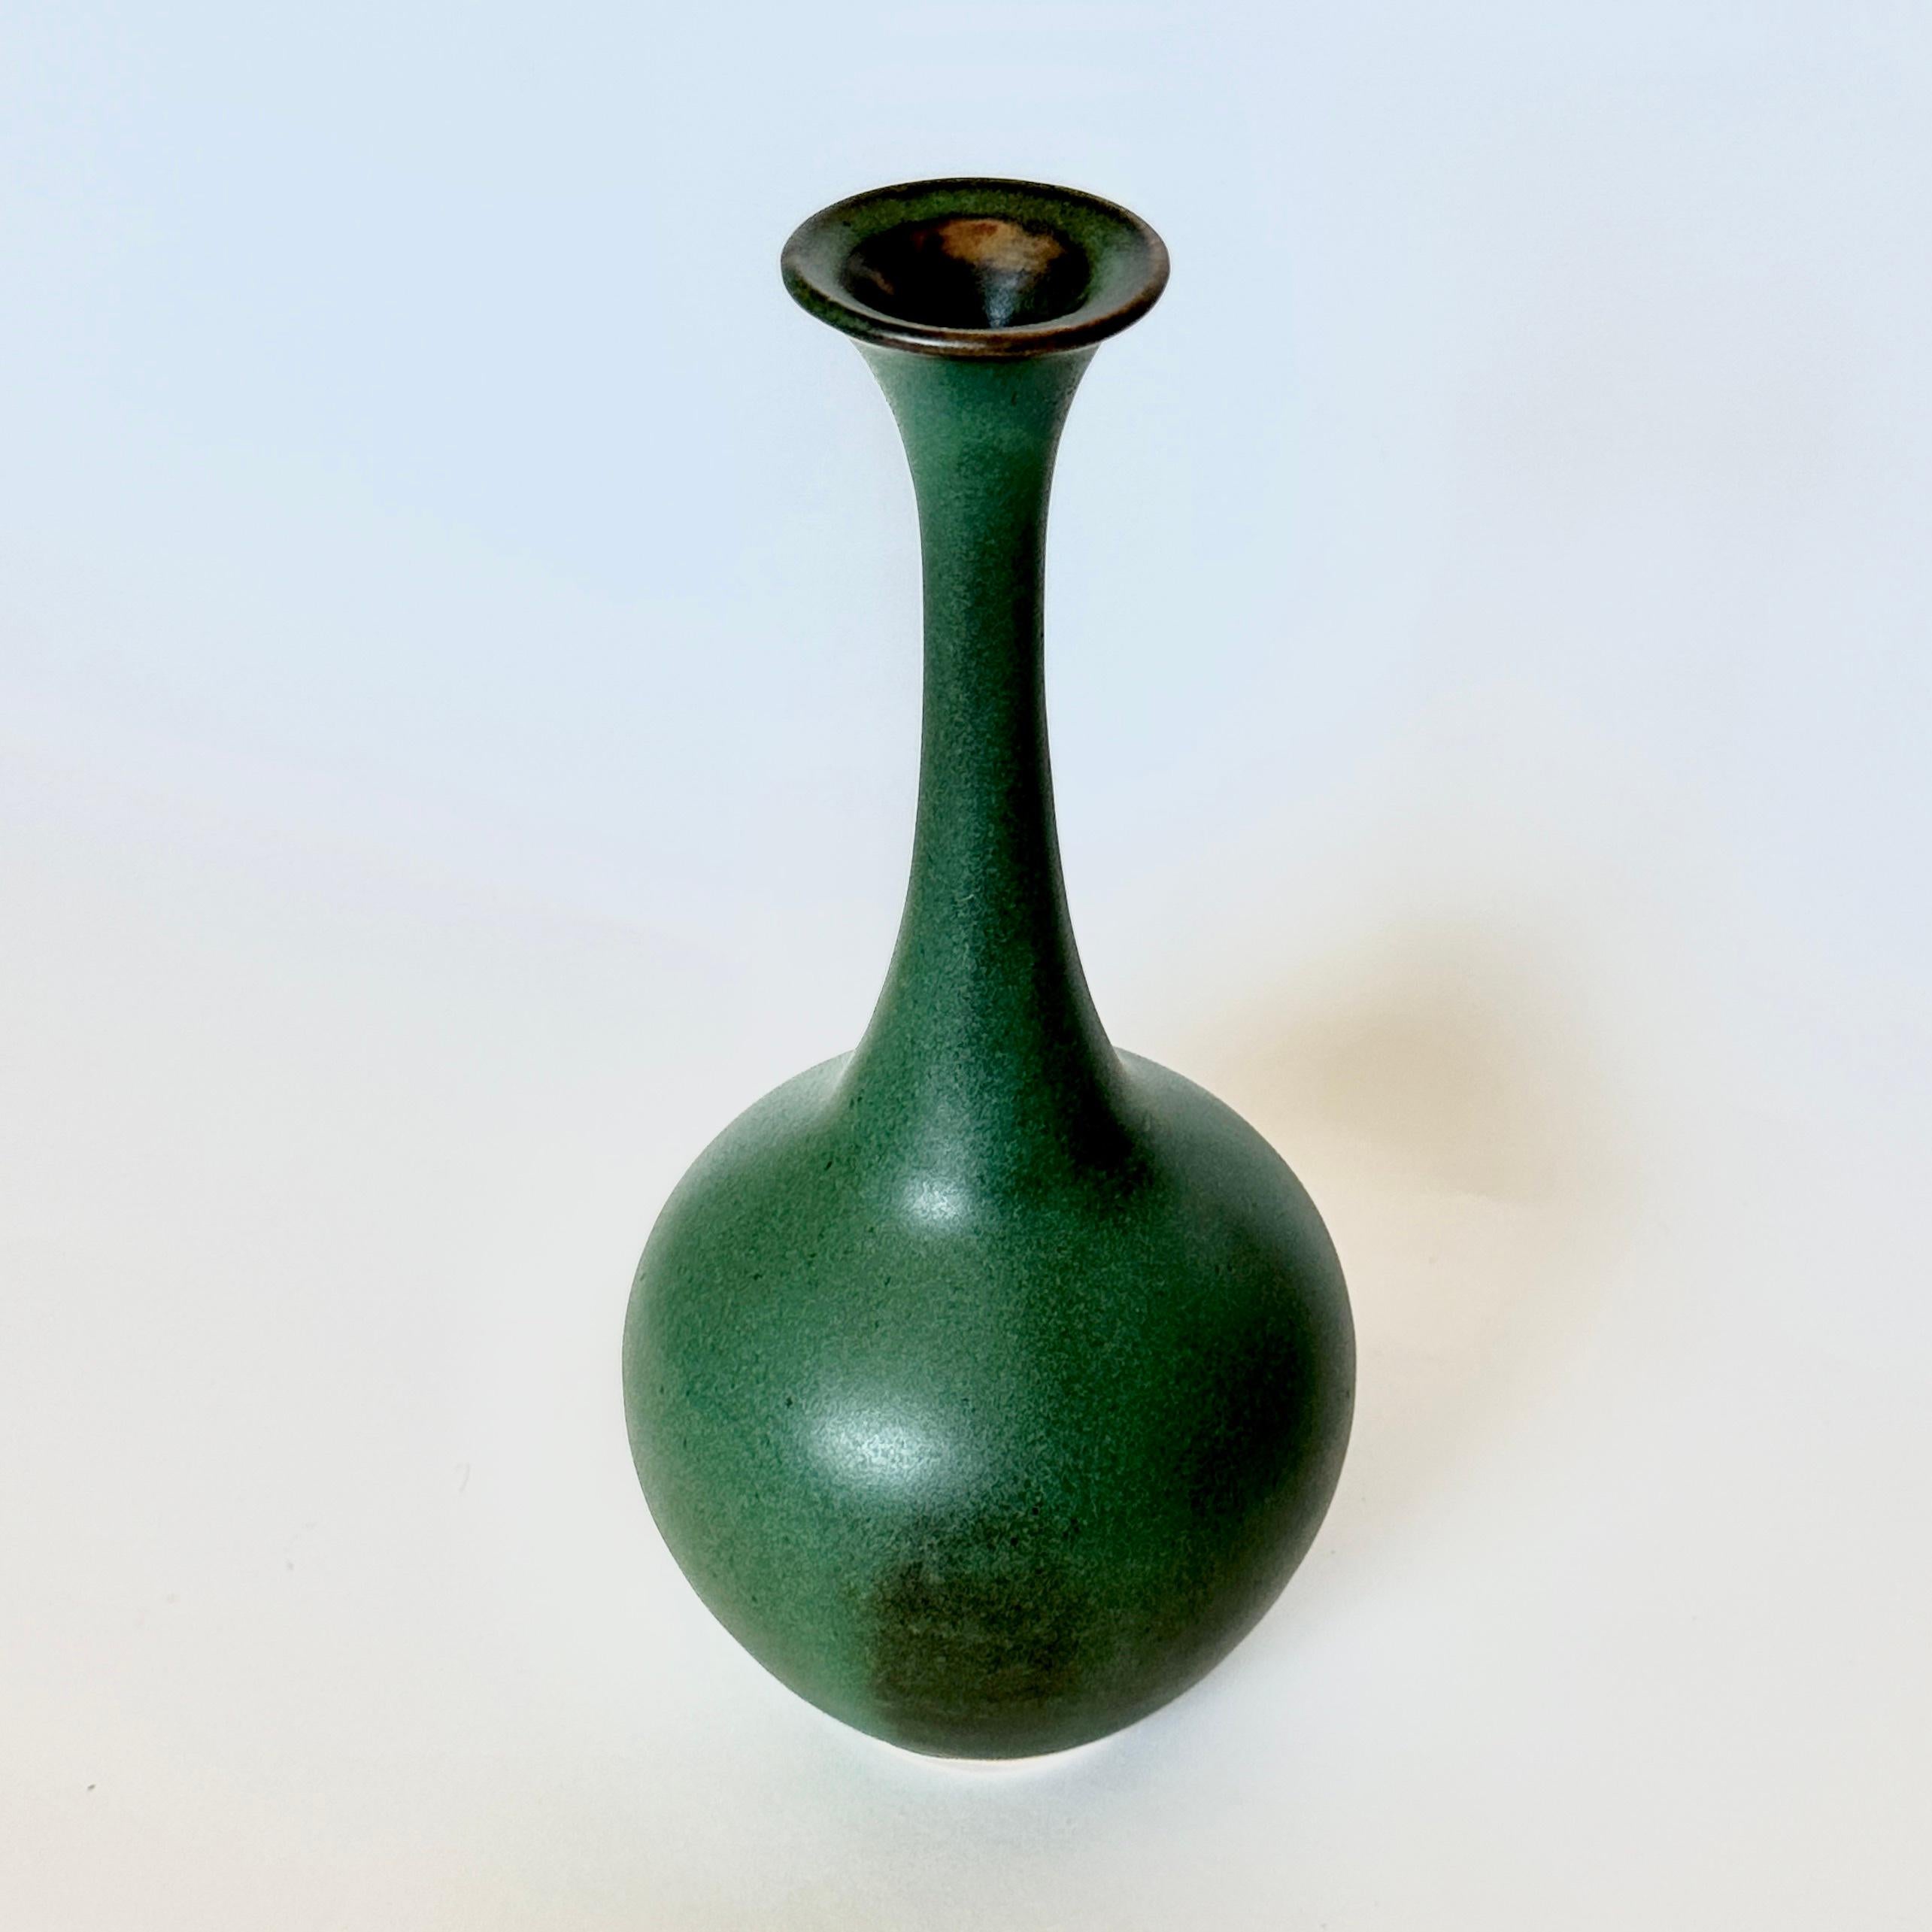 Wheel-thrown and hand-shaped tall bottleneck vessel with flared wide mouth made by Dana Chieco. Glazed in dark green with bronze tones. Fired to Cone 10 (2345 degrees Fahrenheit). 

By accentuating curves and playing with unexpected proportions,